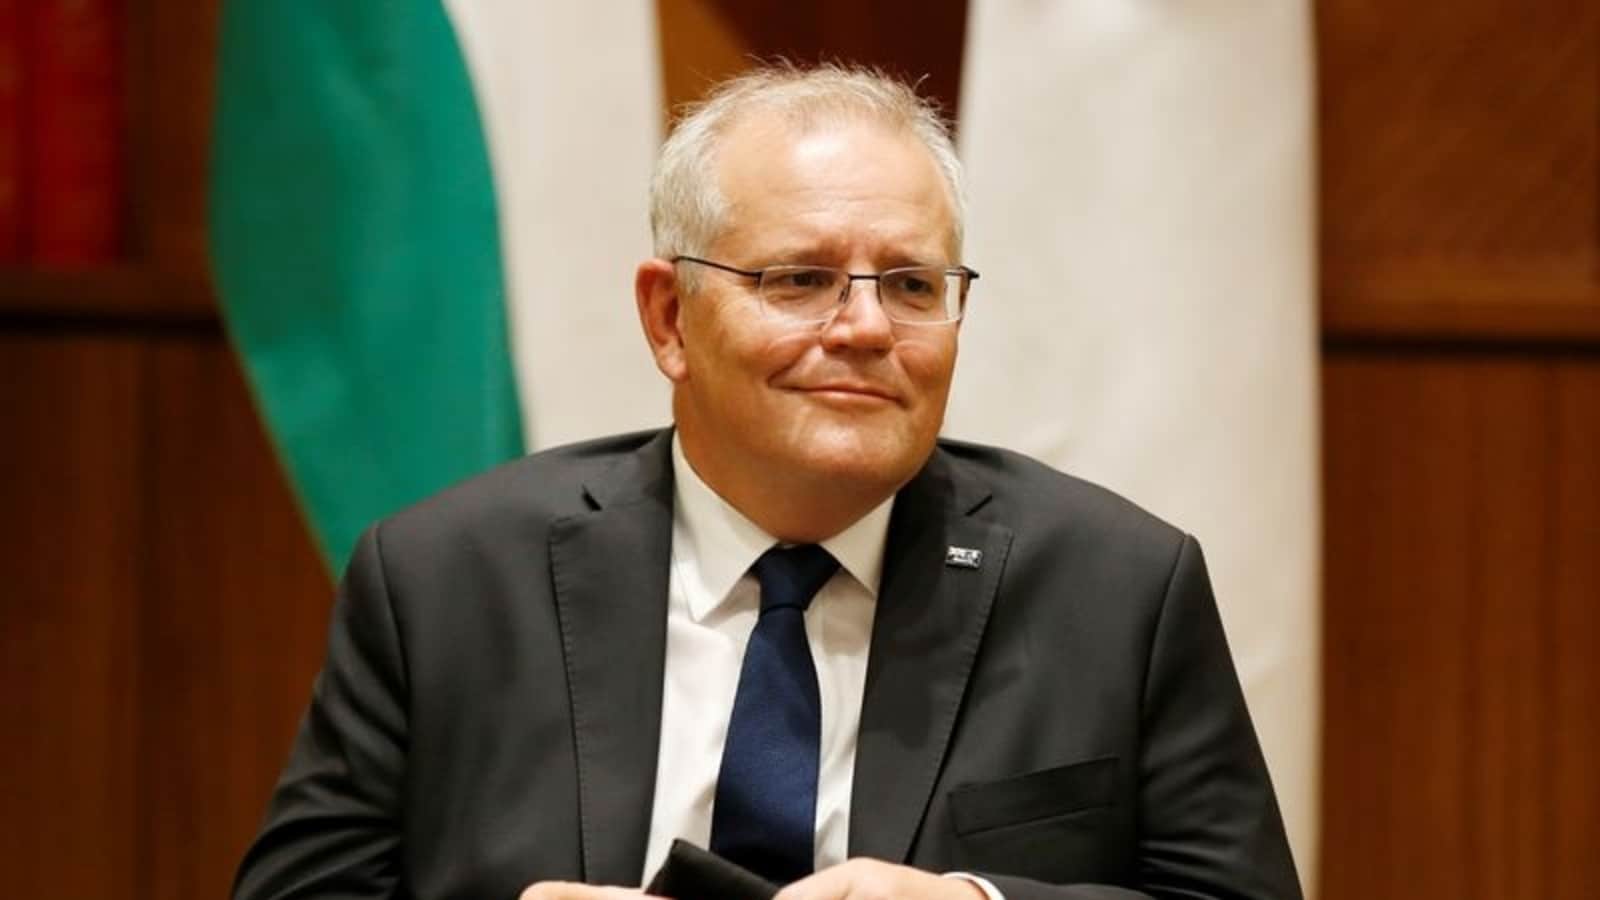 Australian election announcement expected as PM visits governor-general